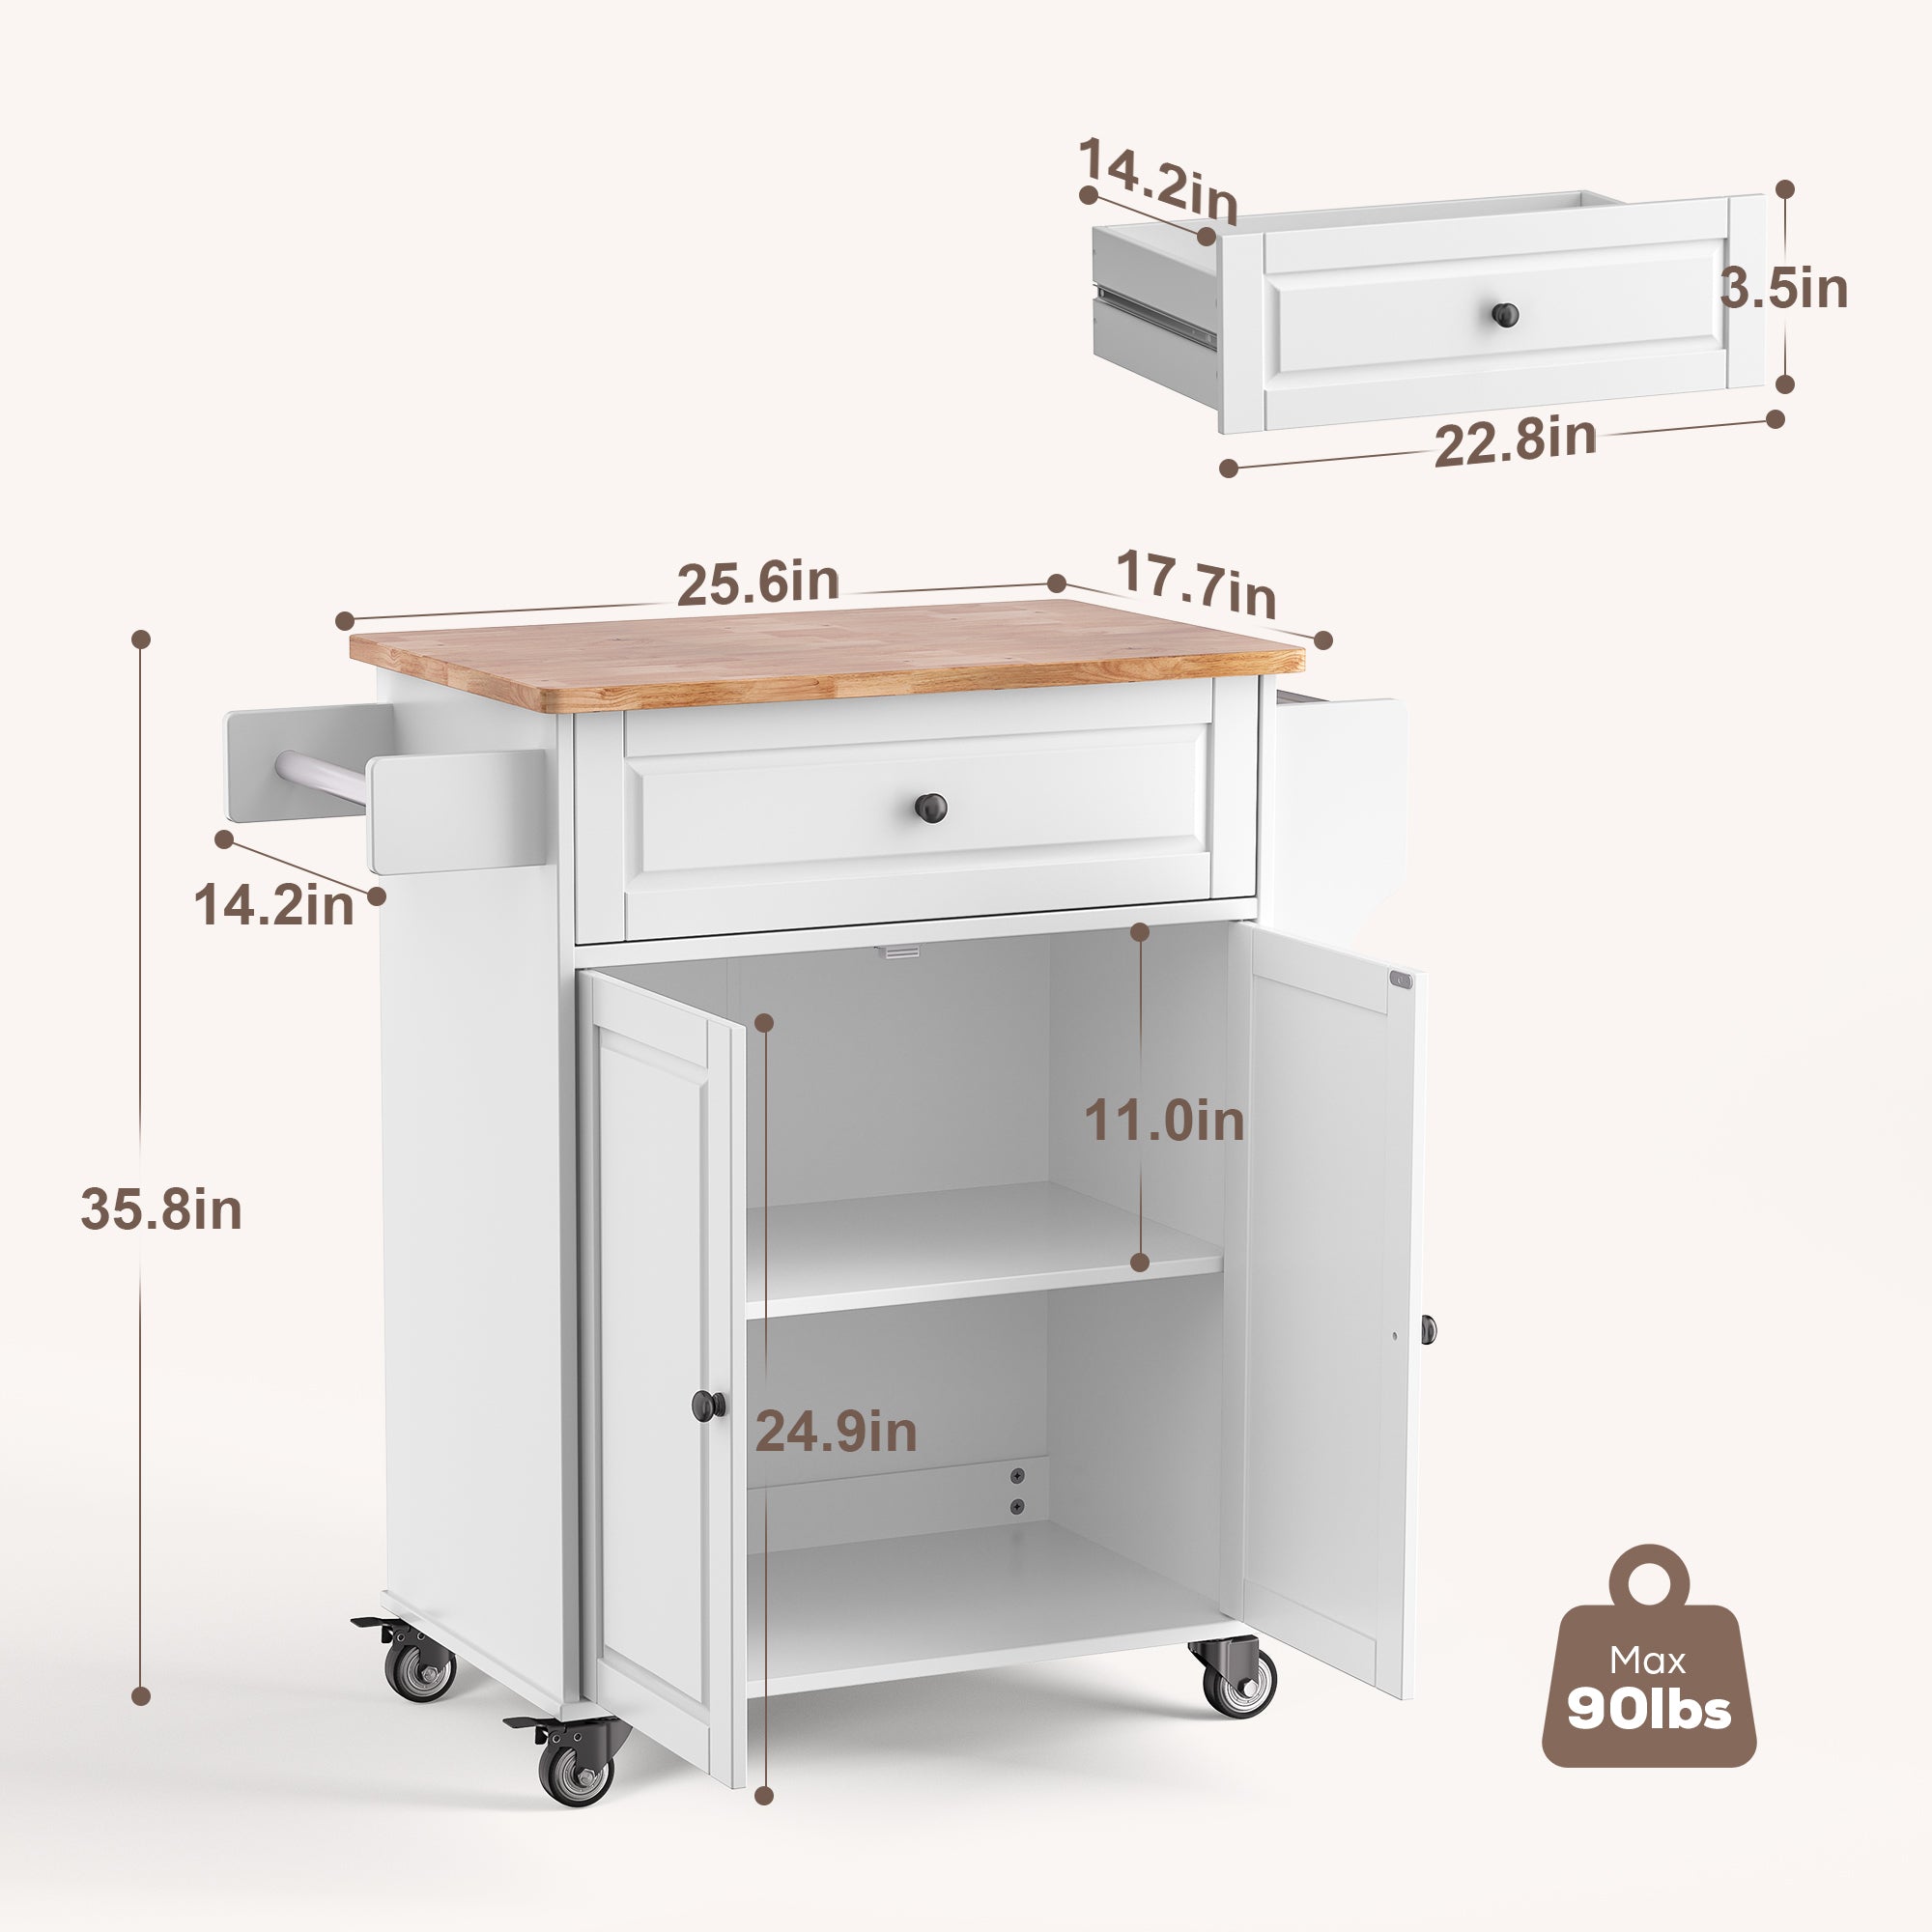 Gizoon AK61 Kitchen Storage Cart Rolling Cabinet on Mental Wheels with Drawer